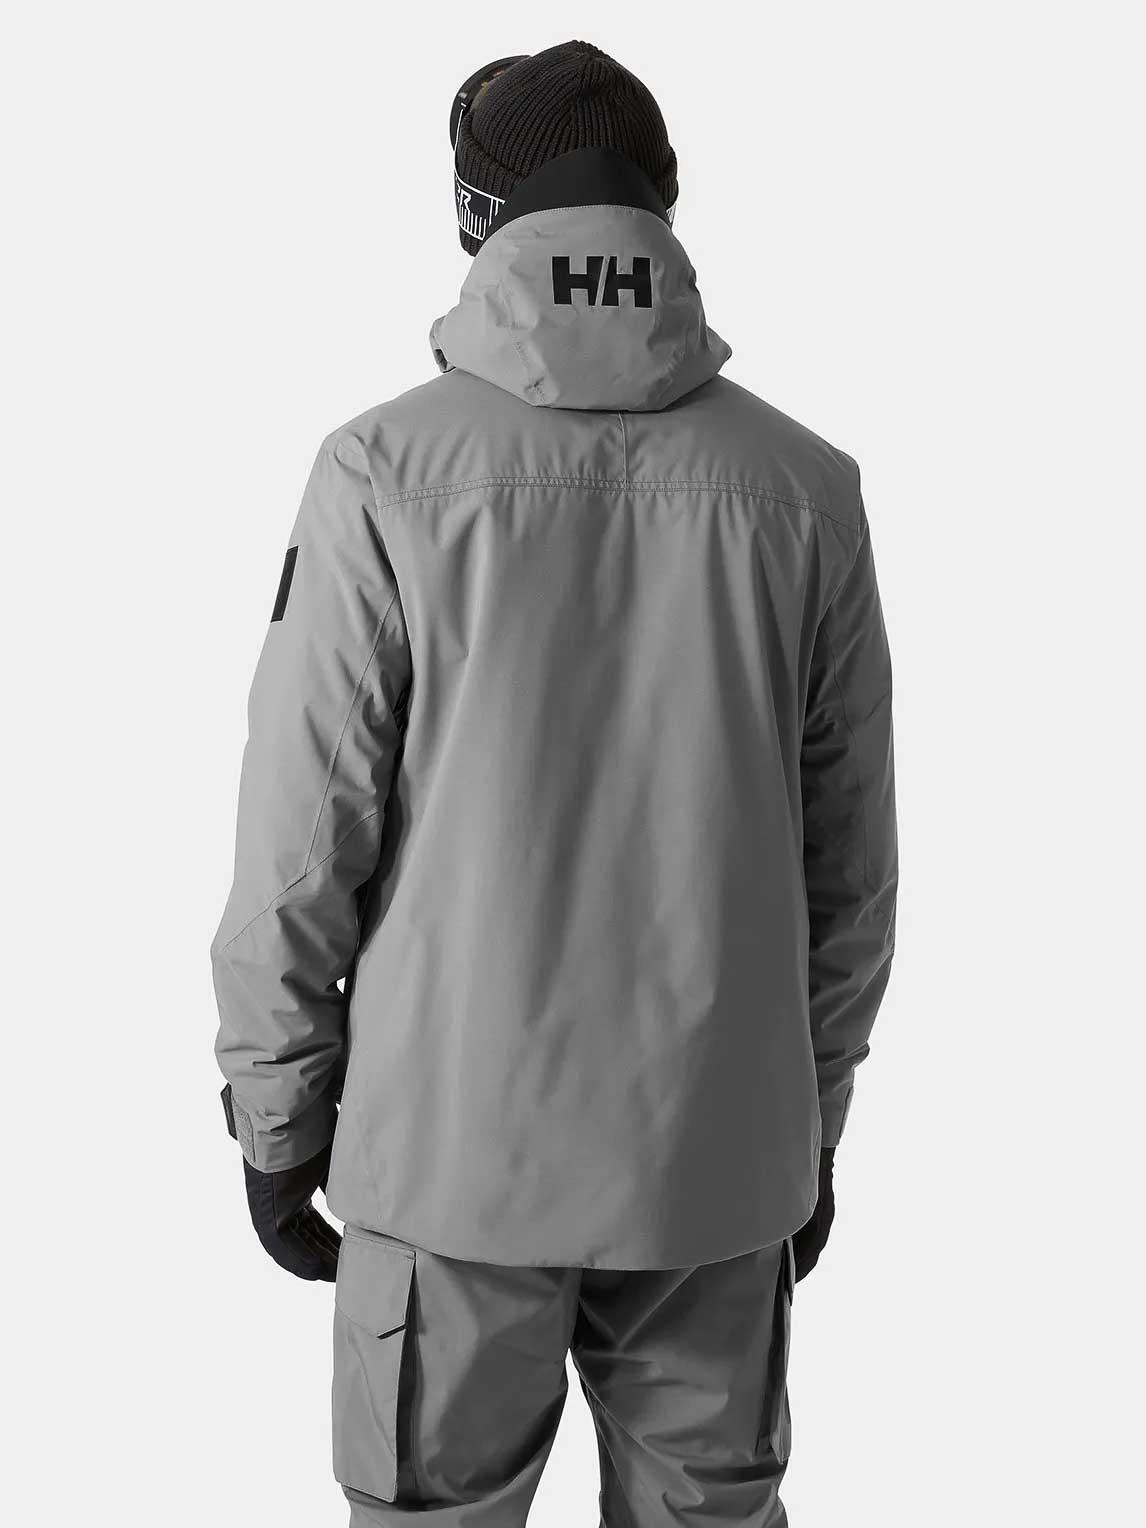 Selected image for HELLY HANSEN Muška ski jakna Ullr D Insulated HH-65877 siva